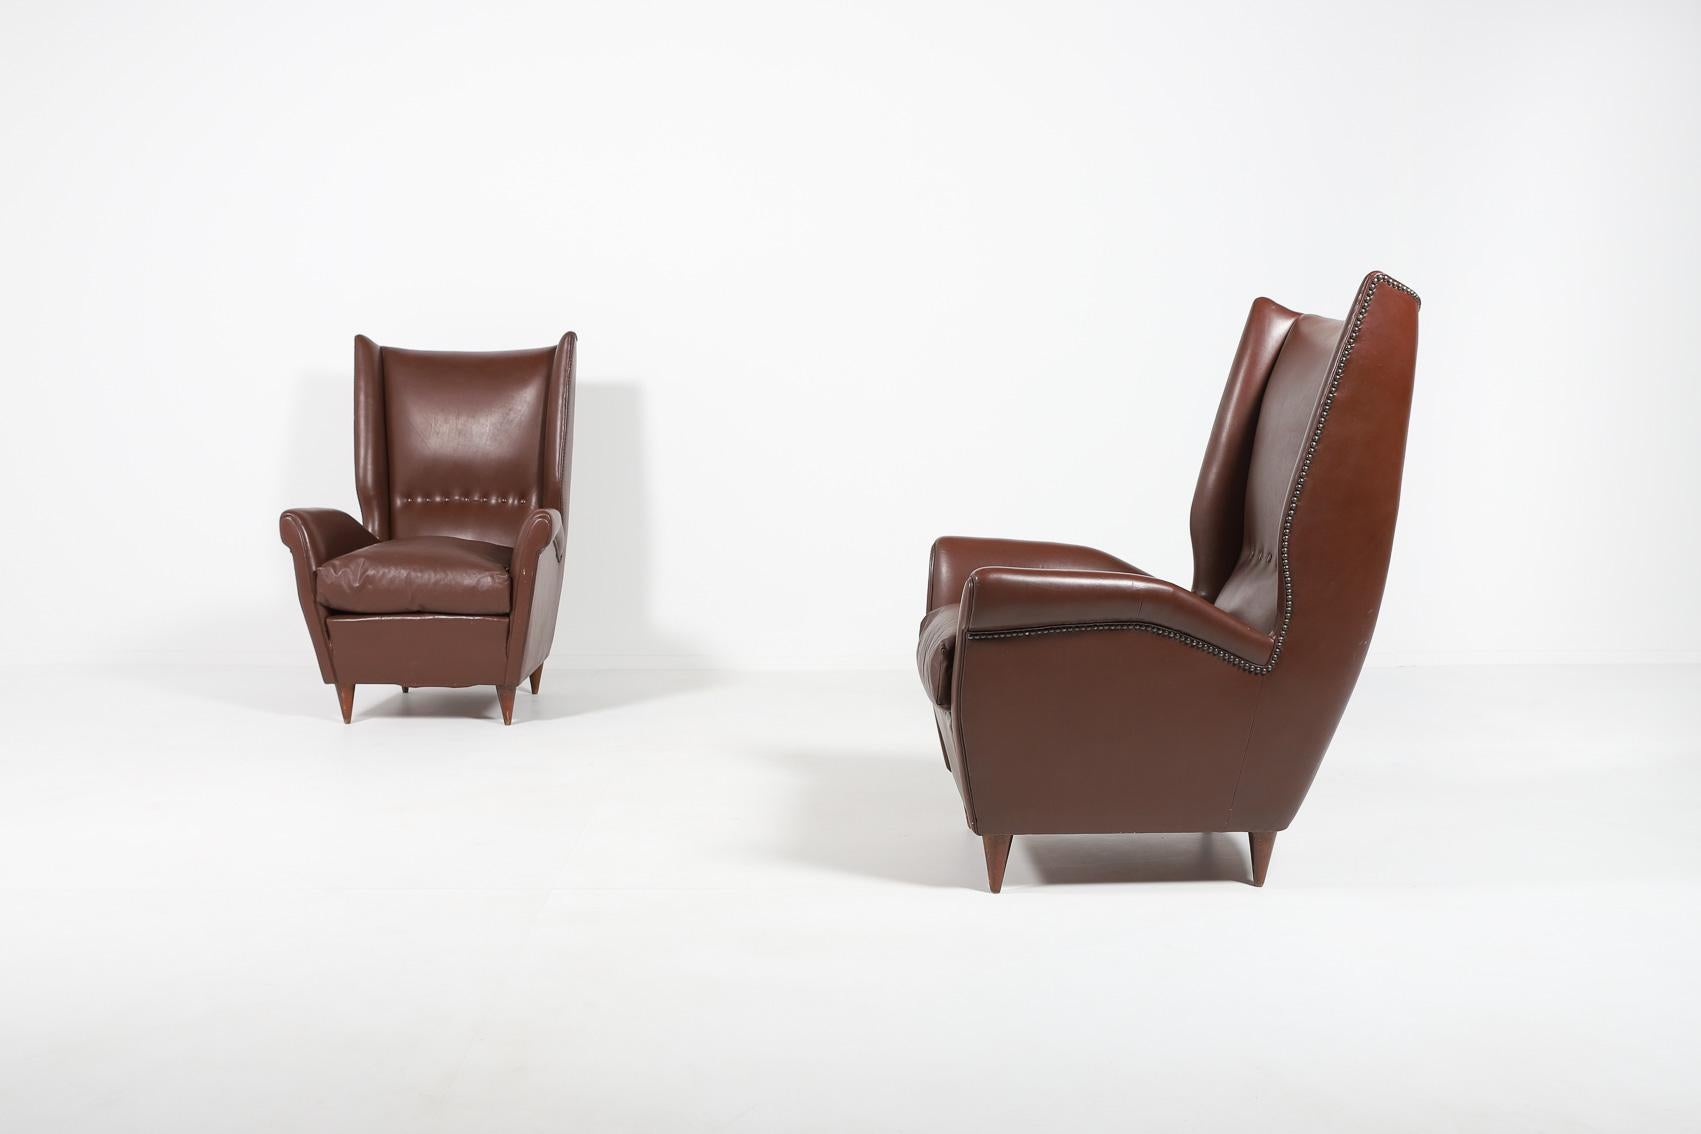 Pair of 2 spectacular lounge armchairs in brown leather on stained wood legs, loose sitting cushions. The mastery of Italian architecture and design icon Gio Ponti, aristocratic and sleek at the same time.

Condition
Good, signs of wear befitting